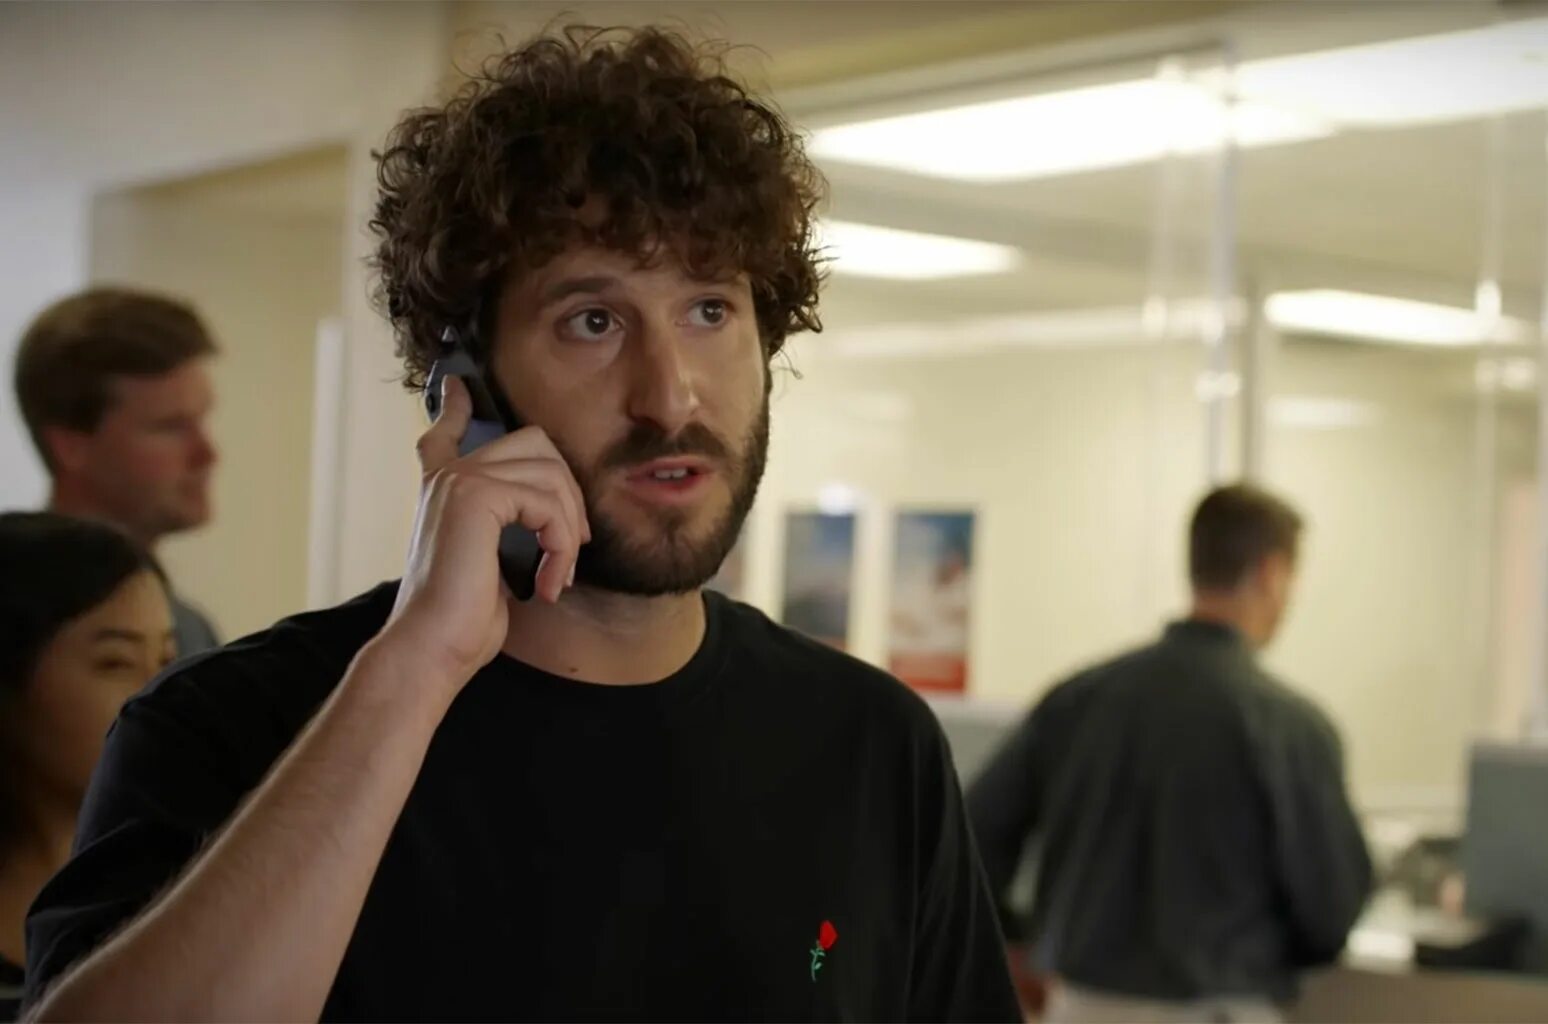 Lil Dicky. David less. Lil Dicky without Beard. Lil Dicky dating- what is the History of Lil Dicky's relationships?. Lil dick